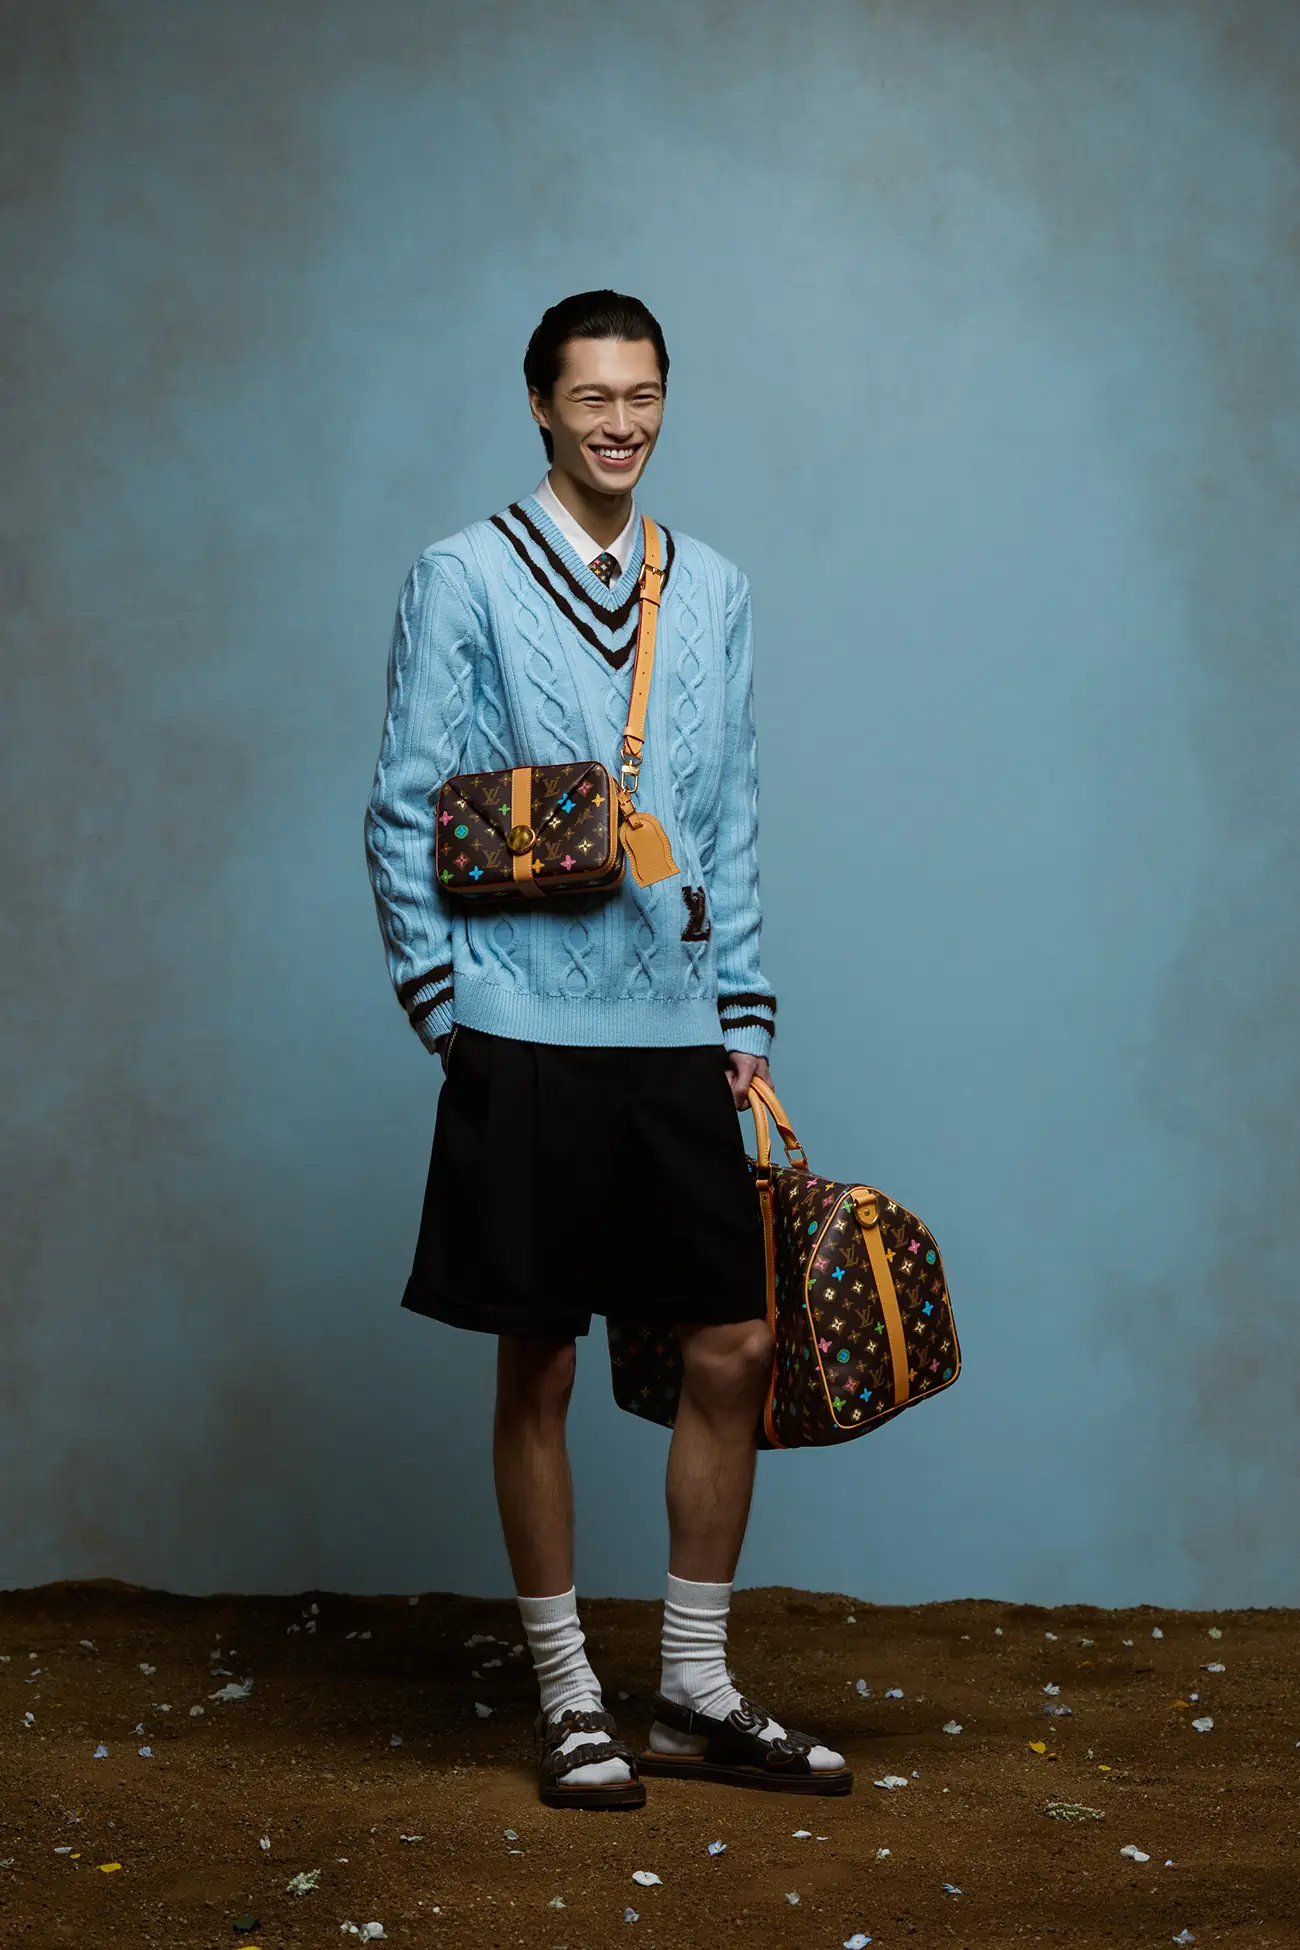 Pharrell Williams and Tyler, the Creator unite for Louis Vuitton capsule collection